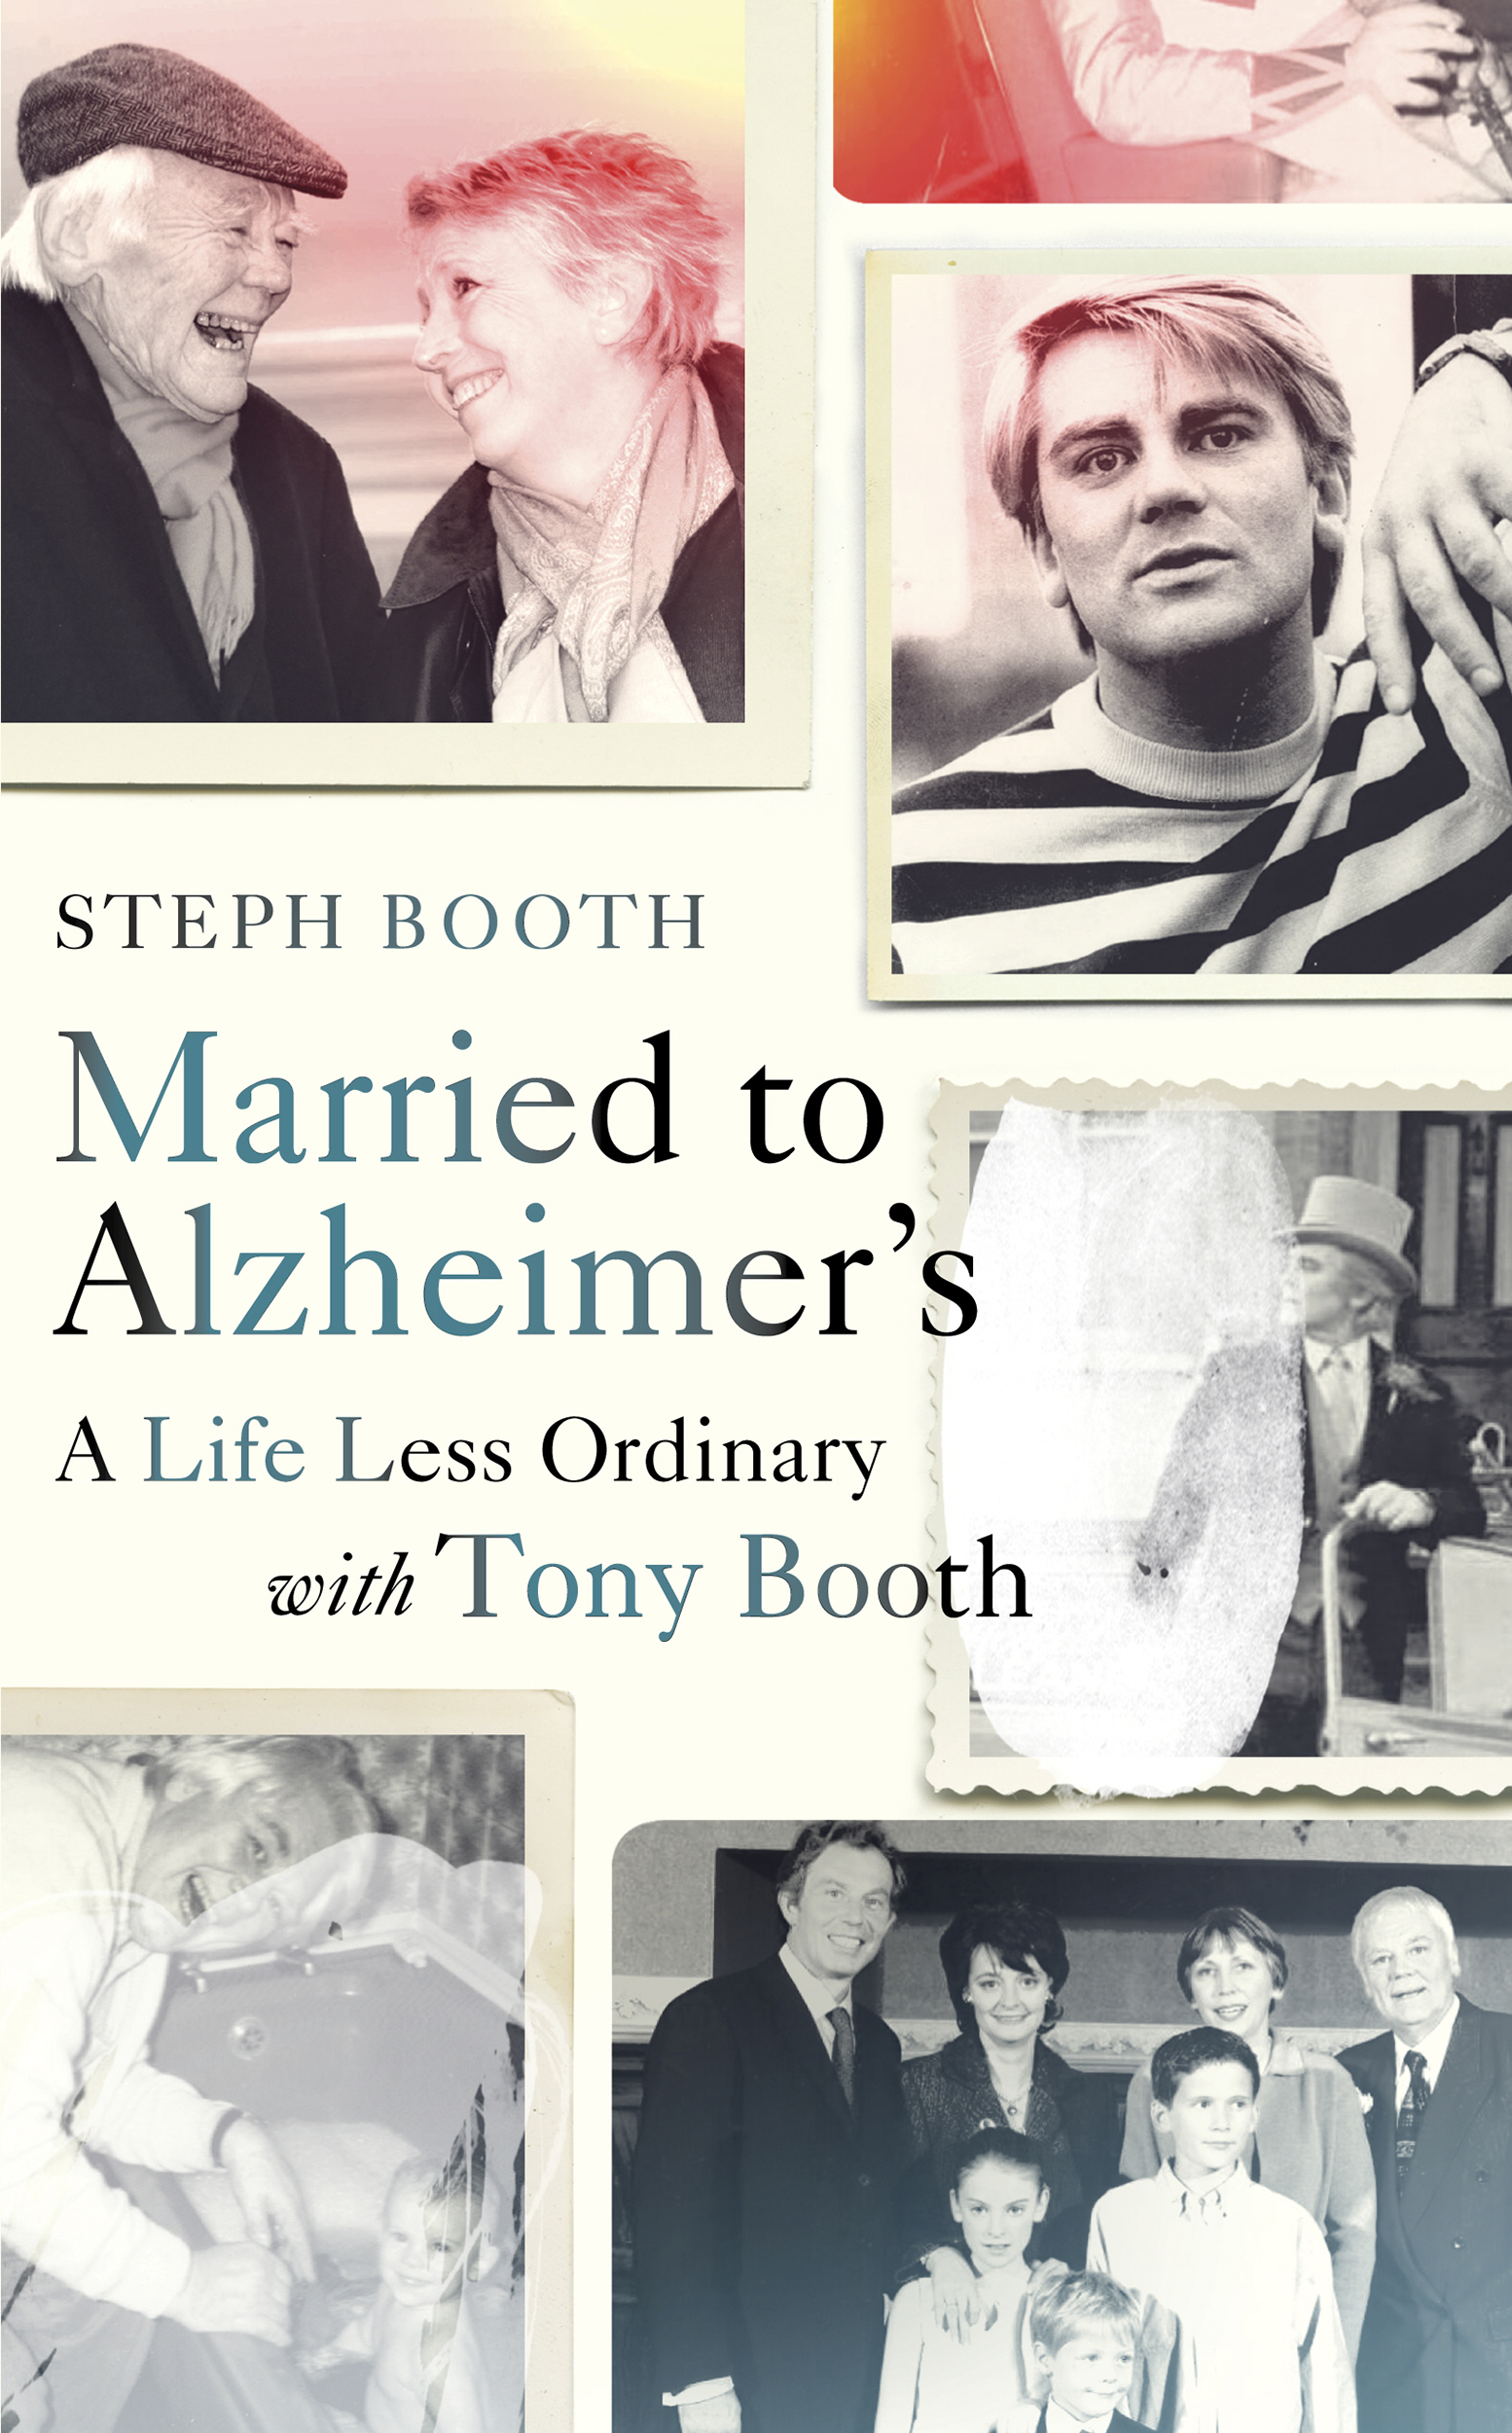 Steph Booth Married to Alzheimers A life less ordinary with Tony Booth - photo 1